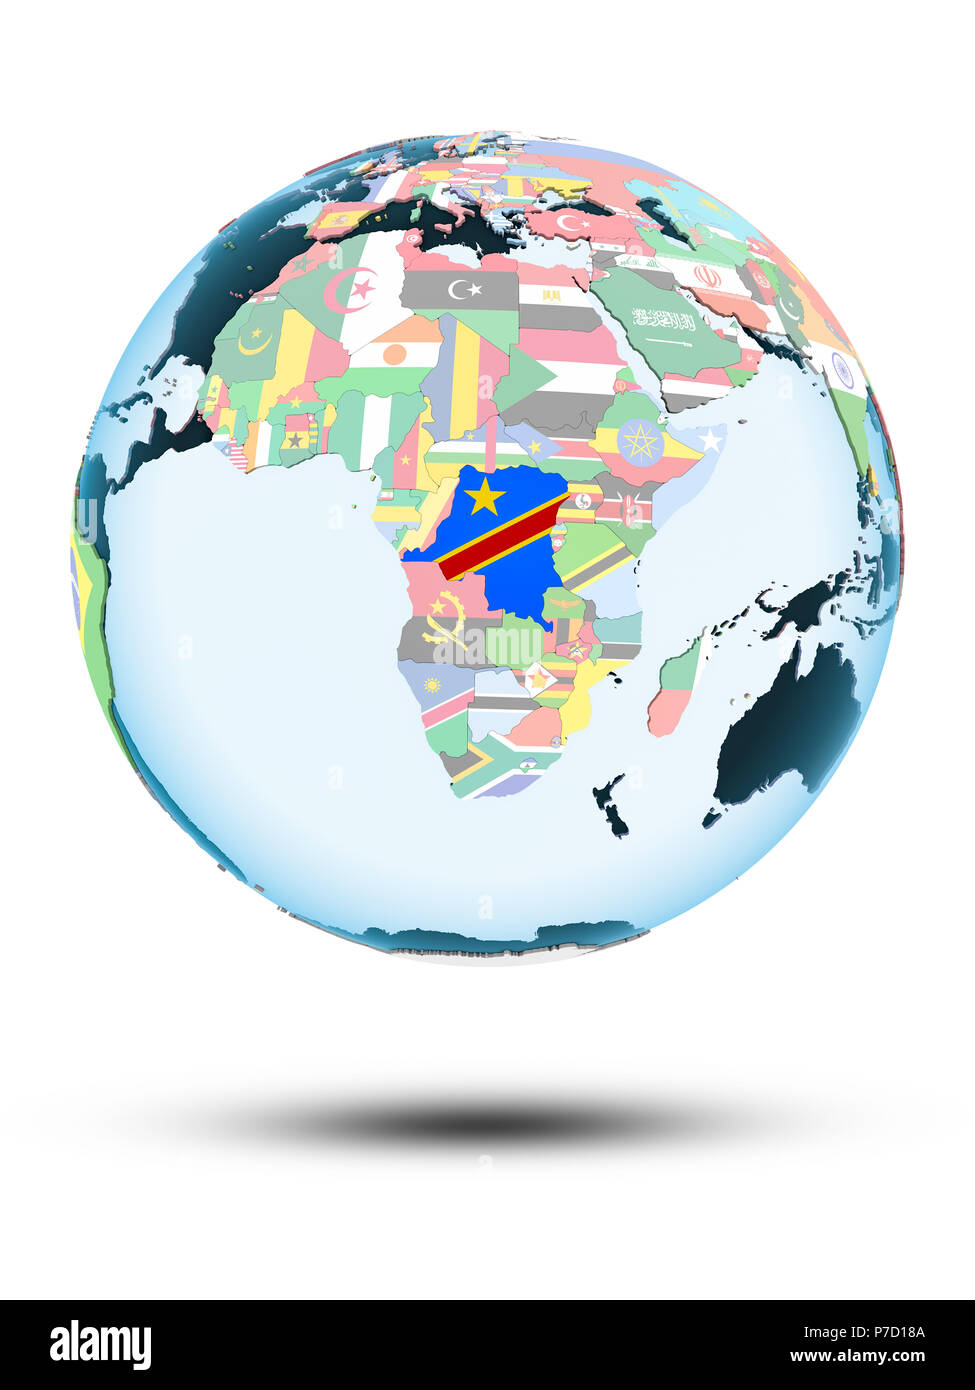 Democratic Republic of Congo on political globe with shadow isolated on white background. 3D illustration. Stock Photo